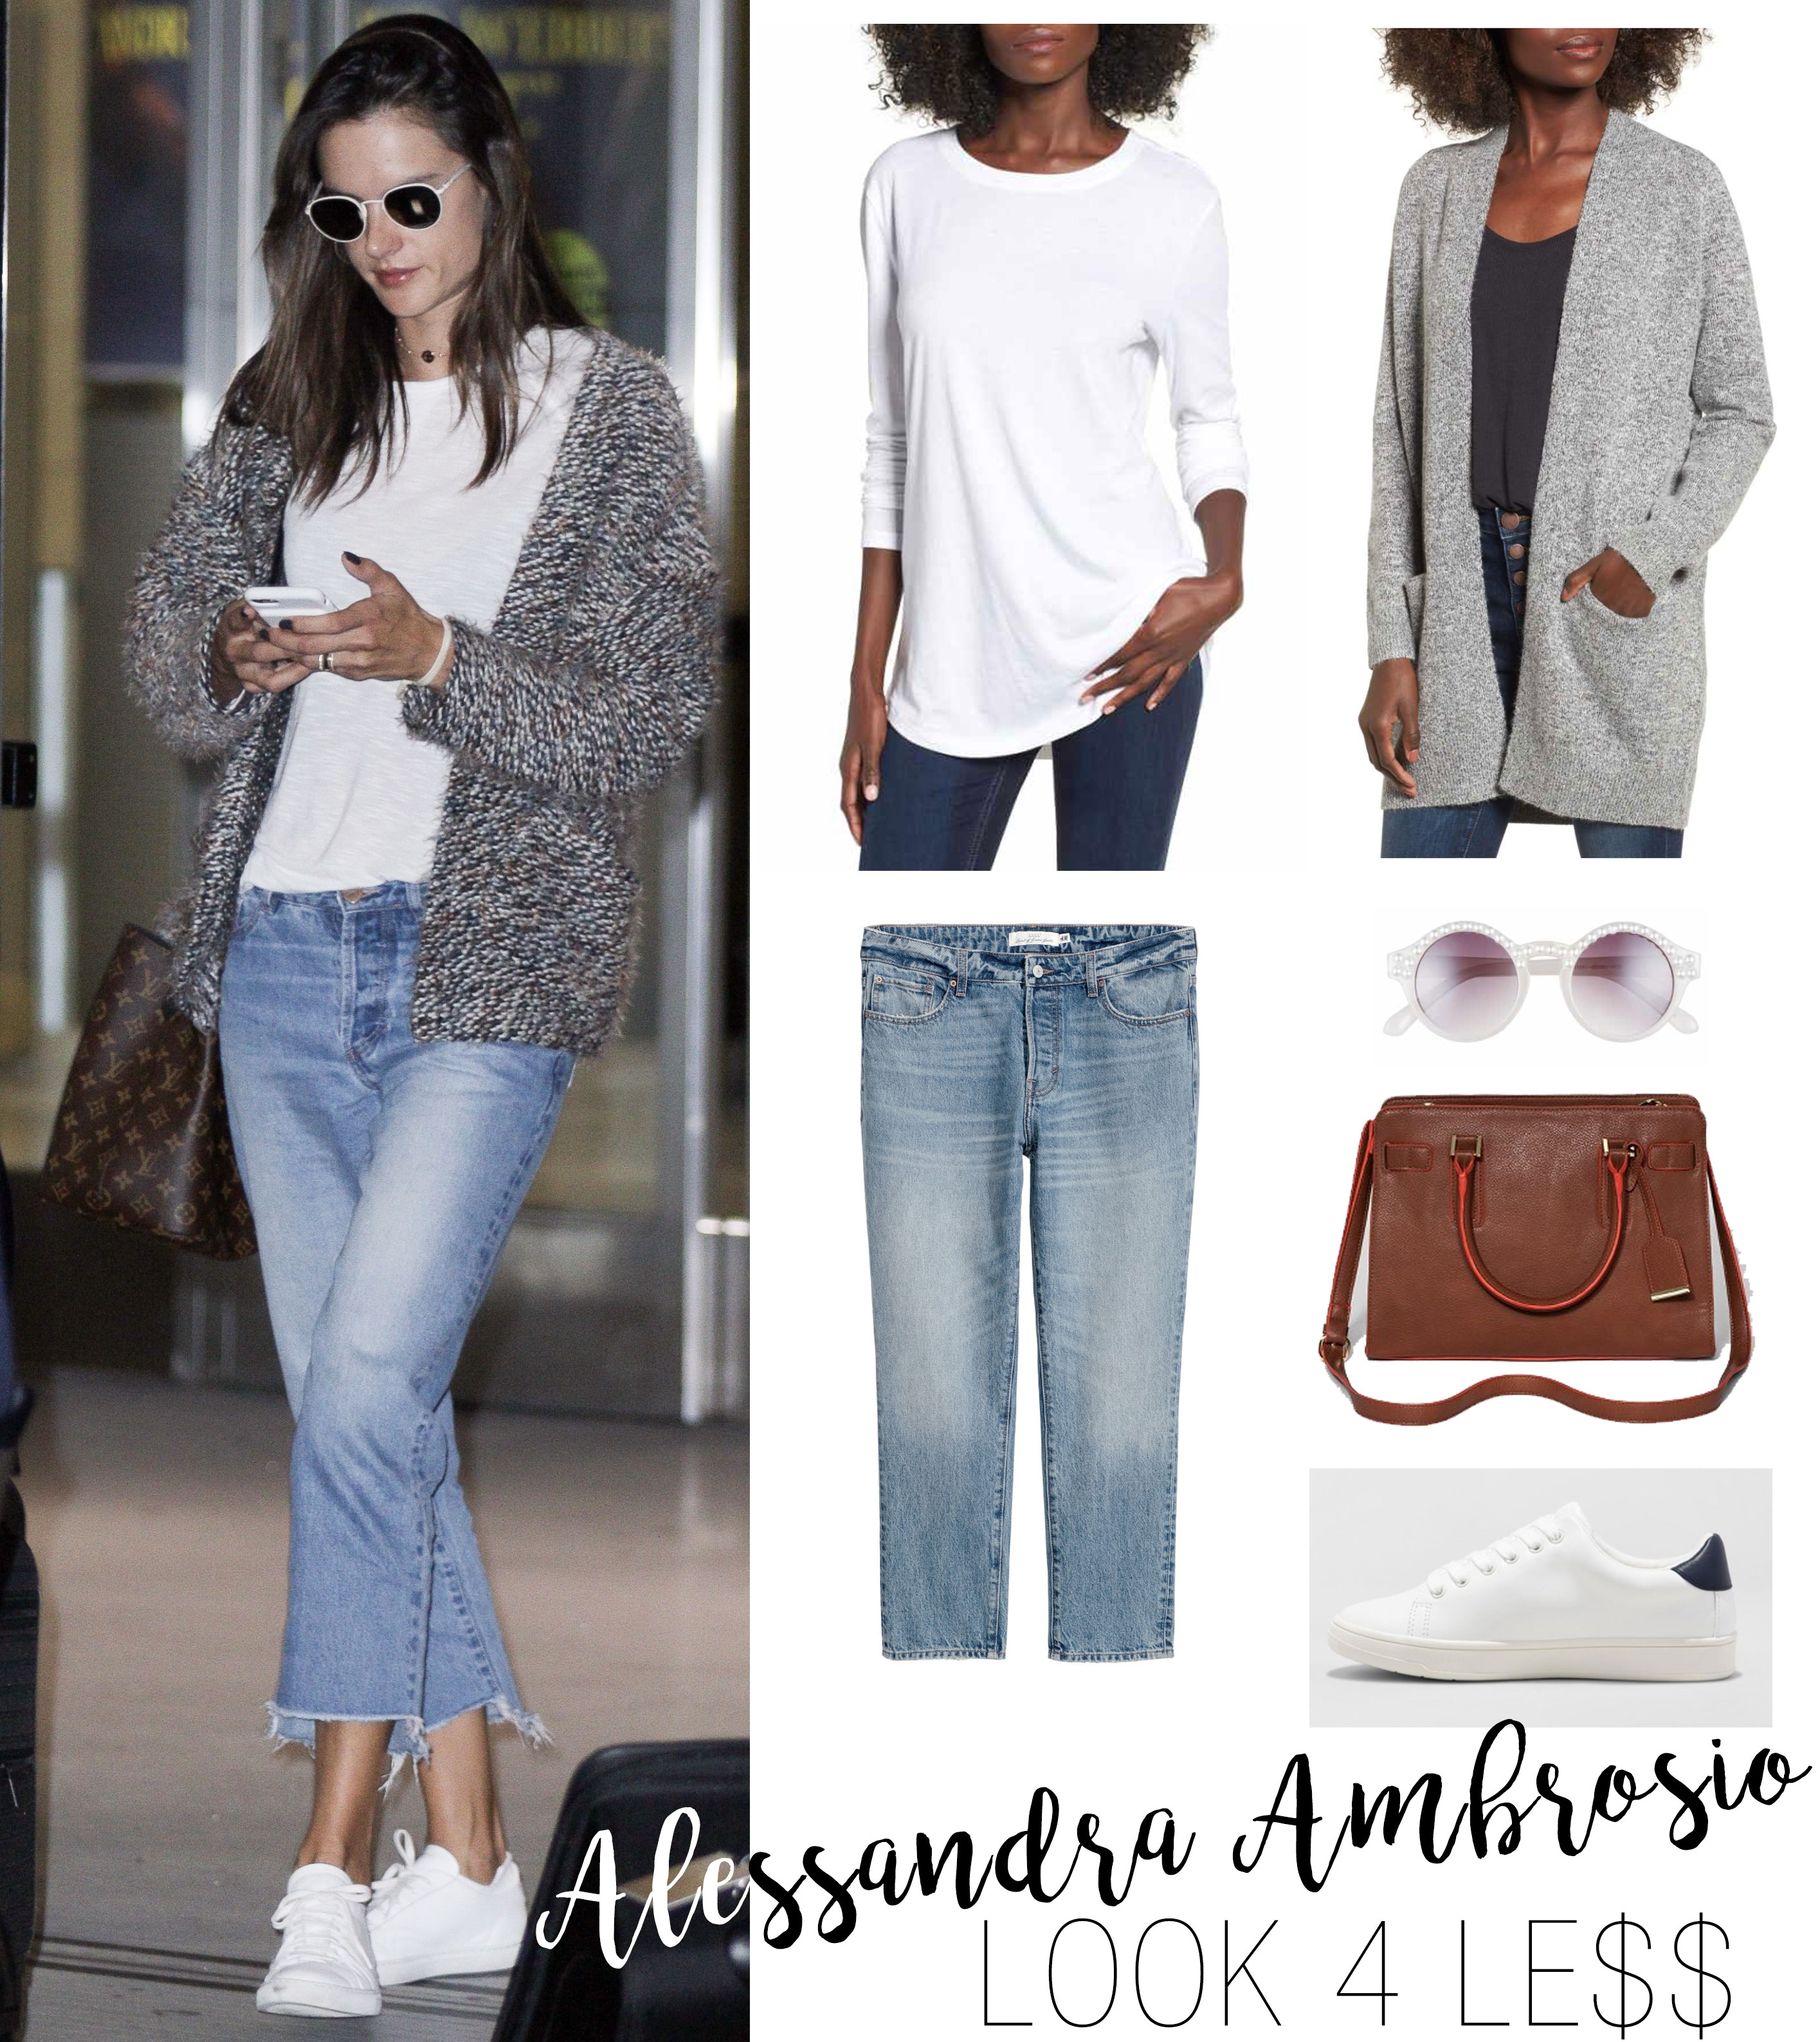 Alessandra Ambrosio wears a chunky knit cardigan with crop jeans and white sneakers while traveling through the airport.